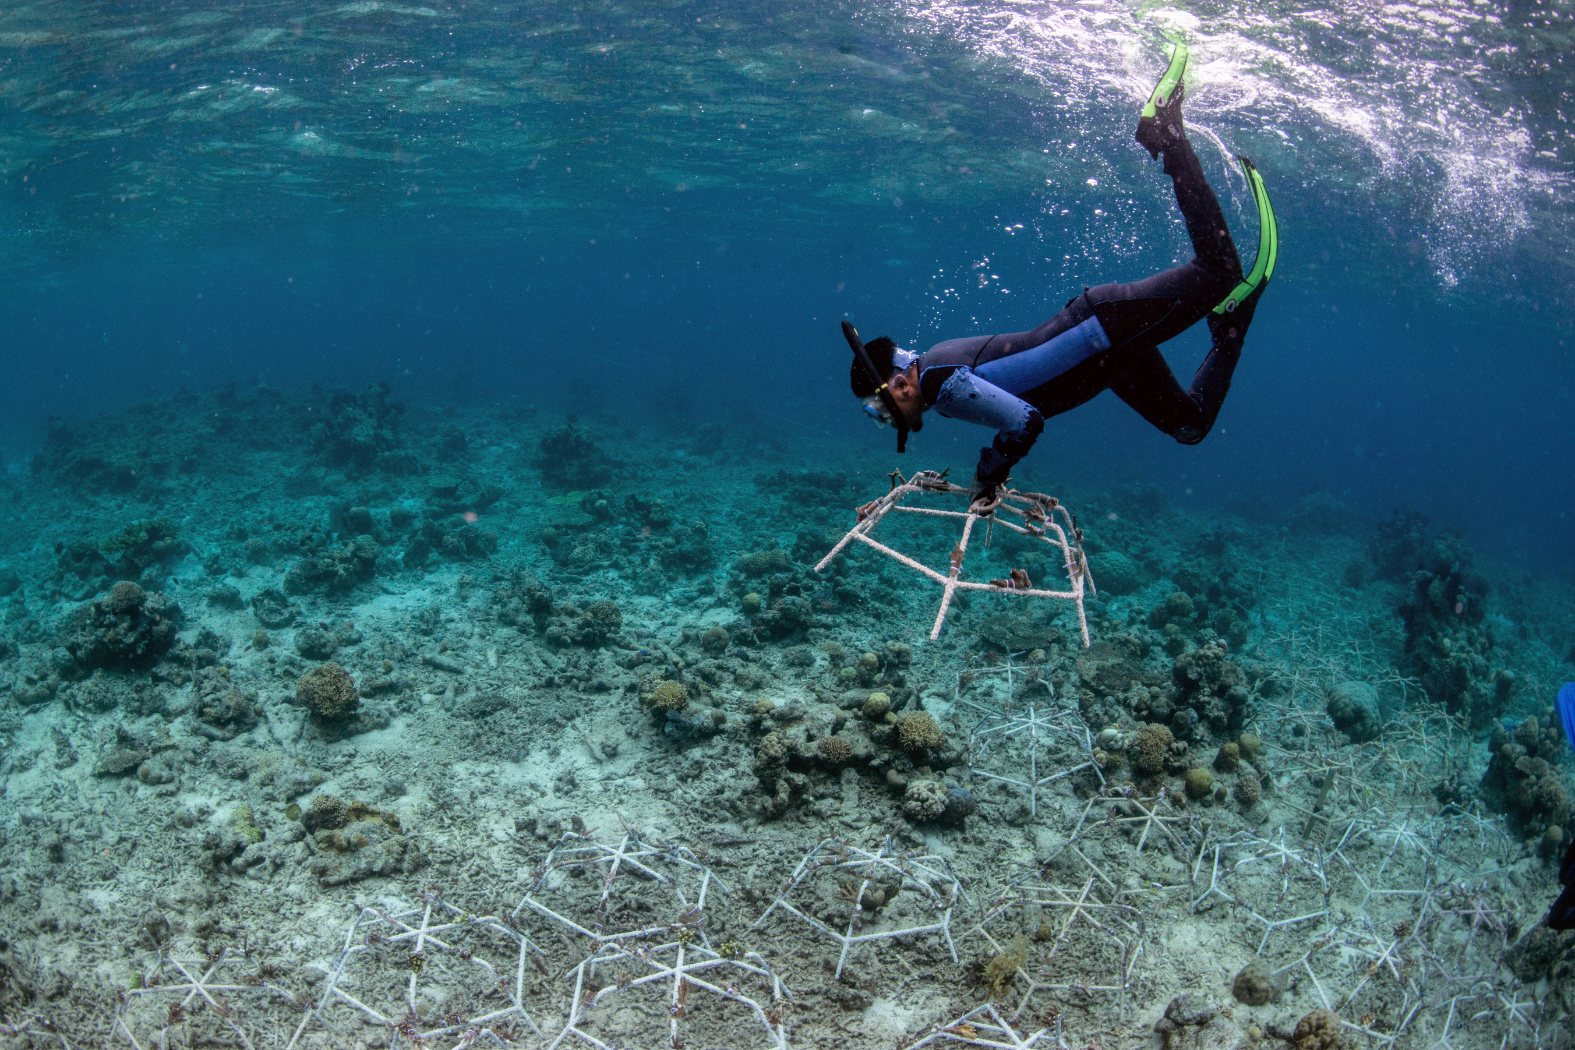 “The speed of recovery we saw is incredible”. Scientists have developed an amazing new technique to restore coral reefs